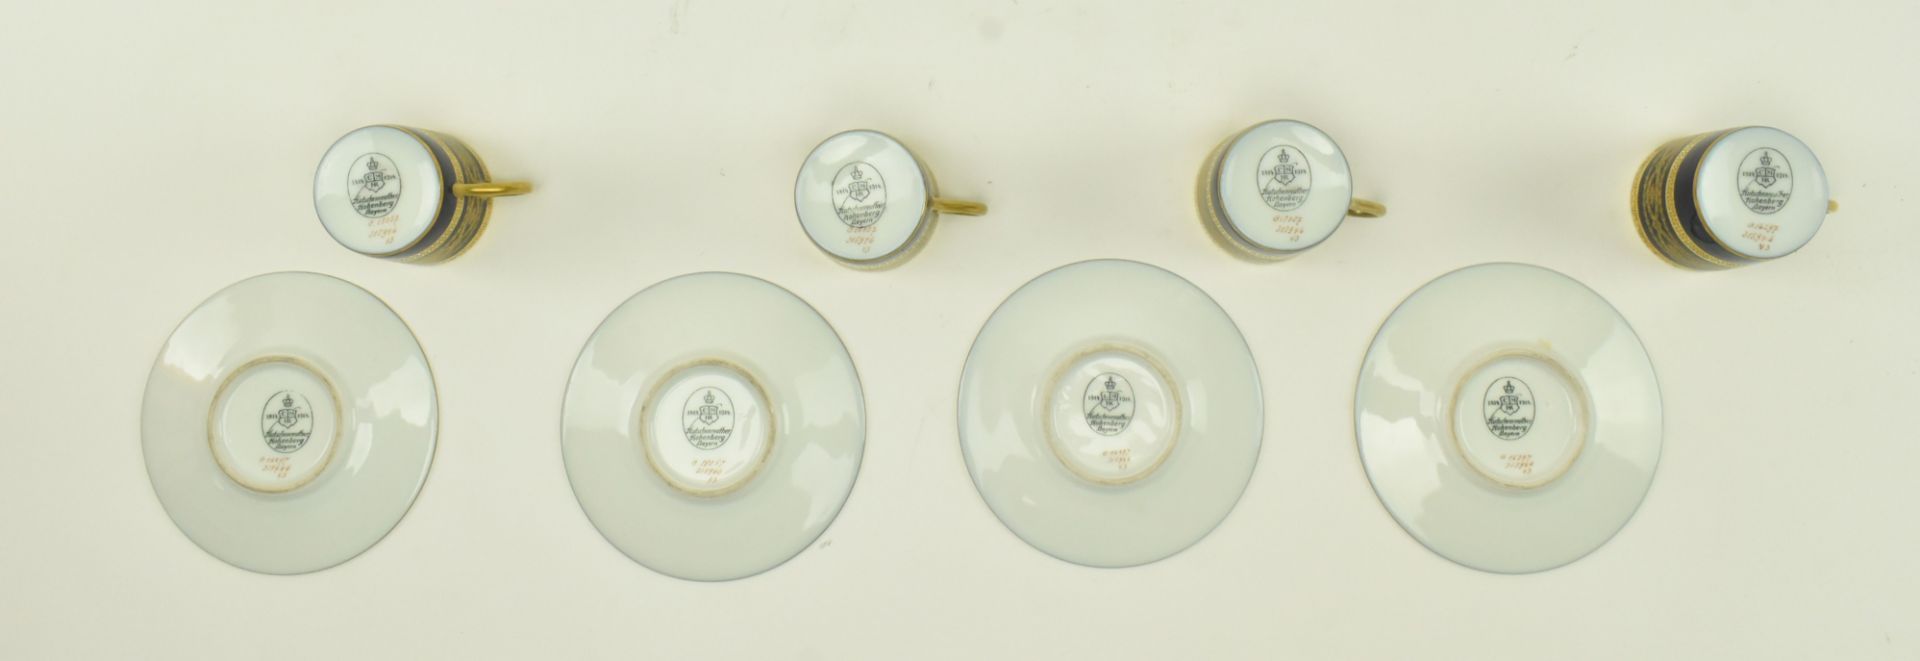 HUTSCHENEREUTHER - EARLY 20TH CENTURY CHINA CUPS & SAUCERS - Bild 5 aus 6